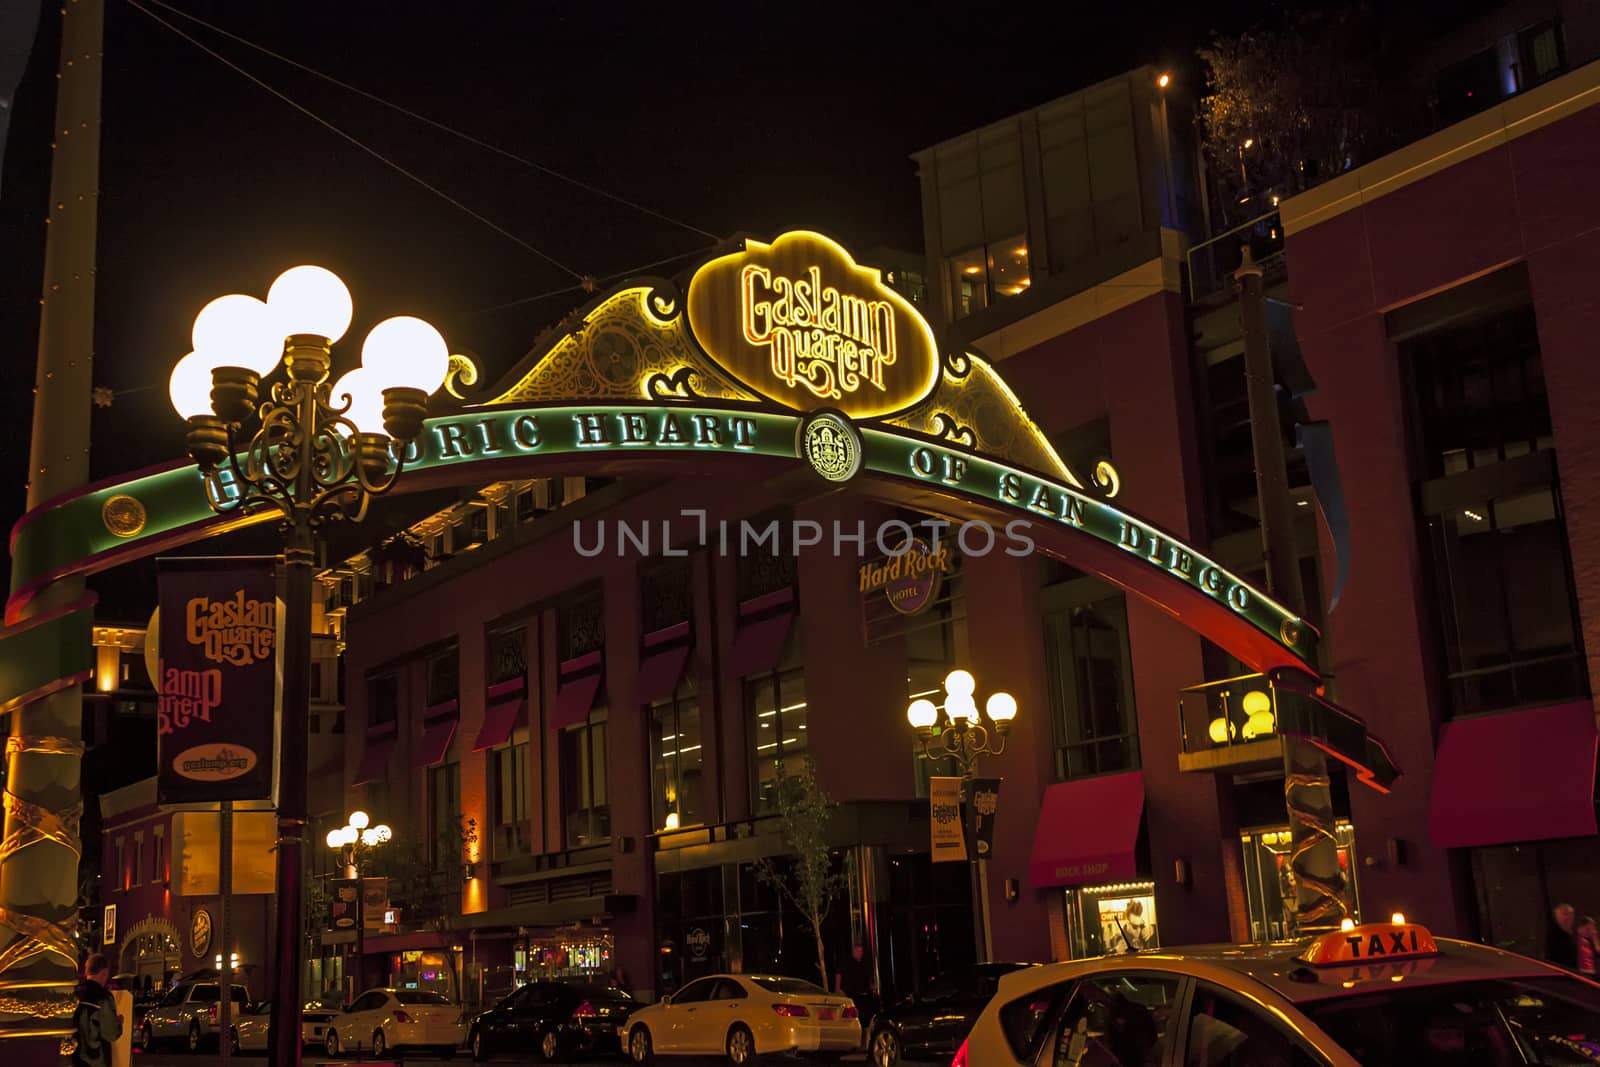 SAN DIEGO , CA - MAY 05 : Sign at the entrance to the Gaslamp Quarter in downtown San Diego,California on May 05, 2014. Historical district, features a bustling entertainment scene with bars and restaurants.